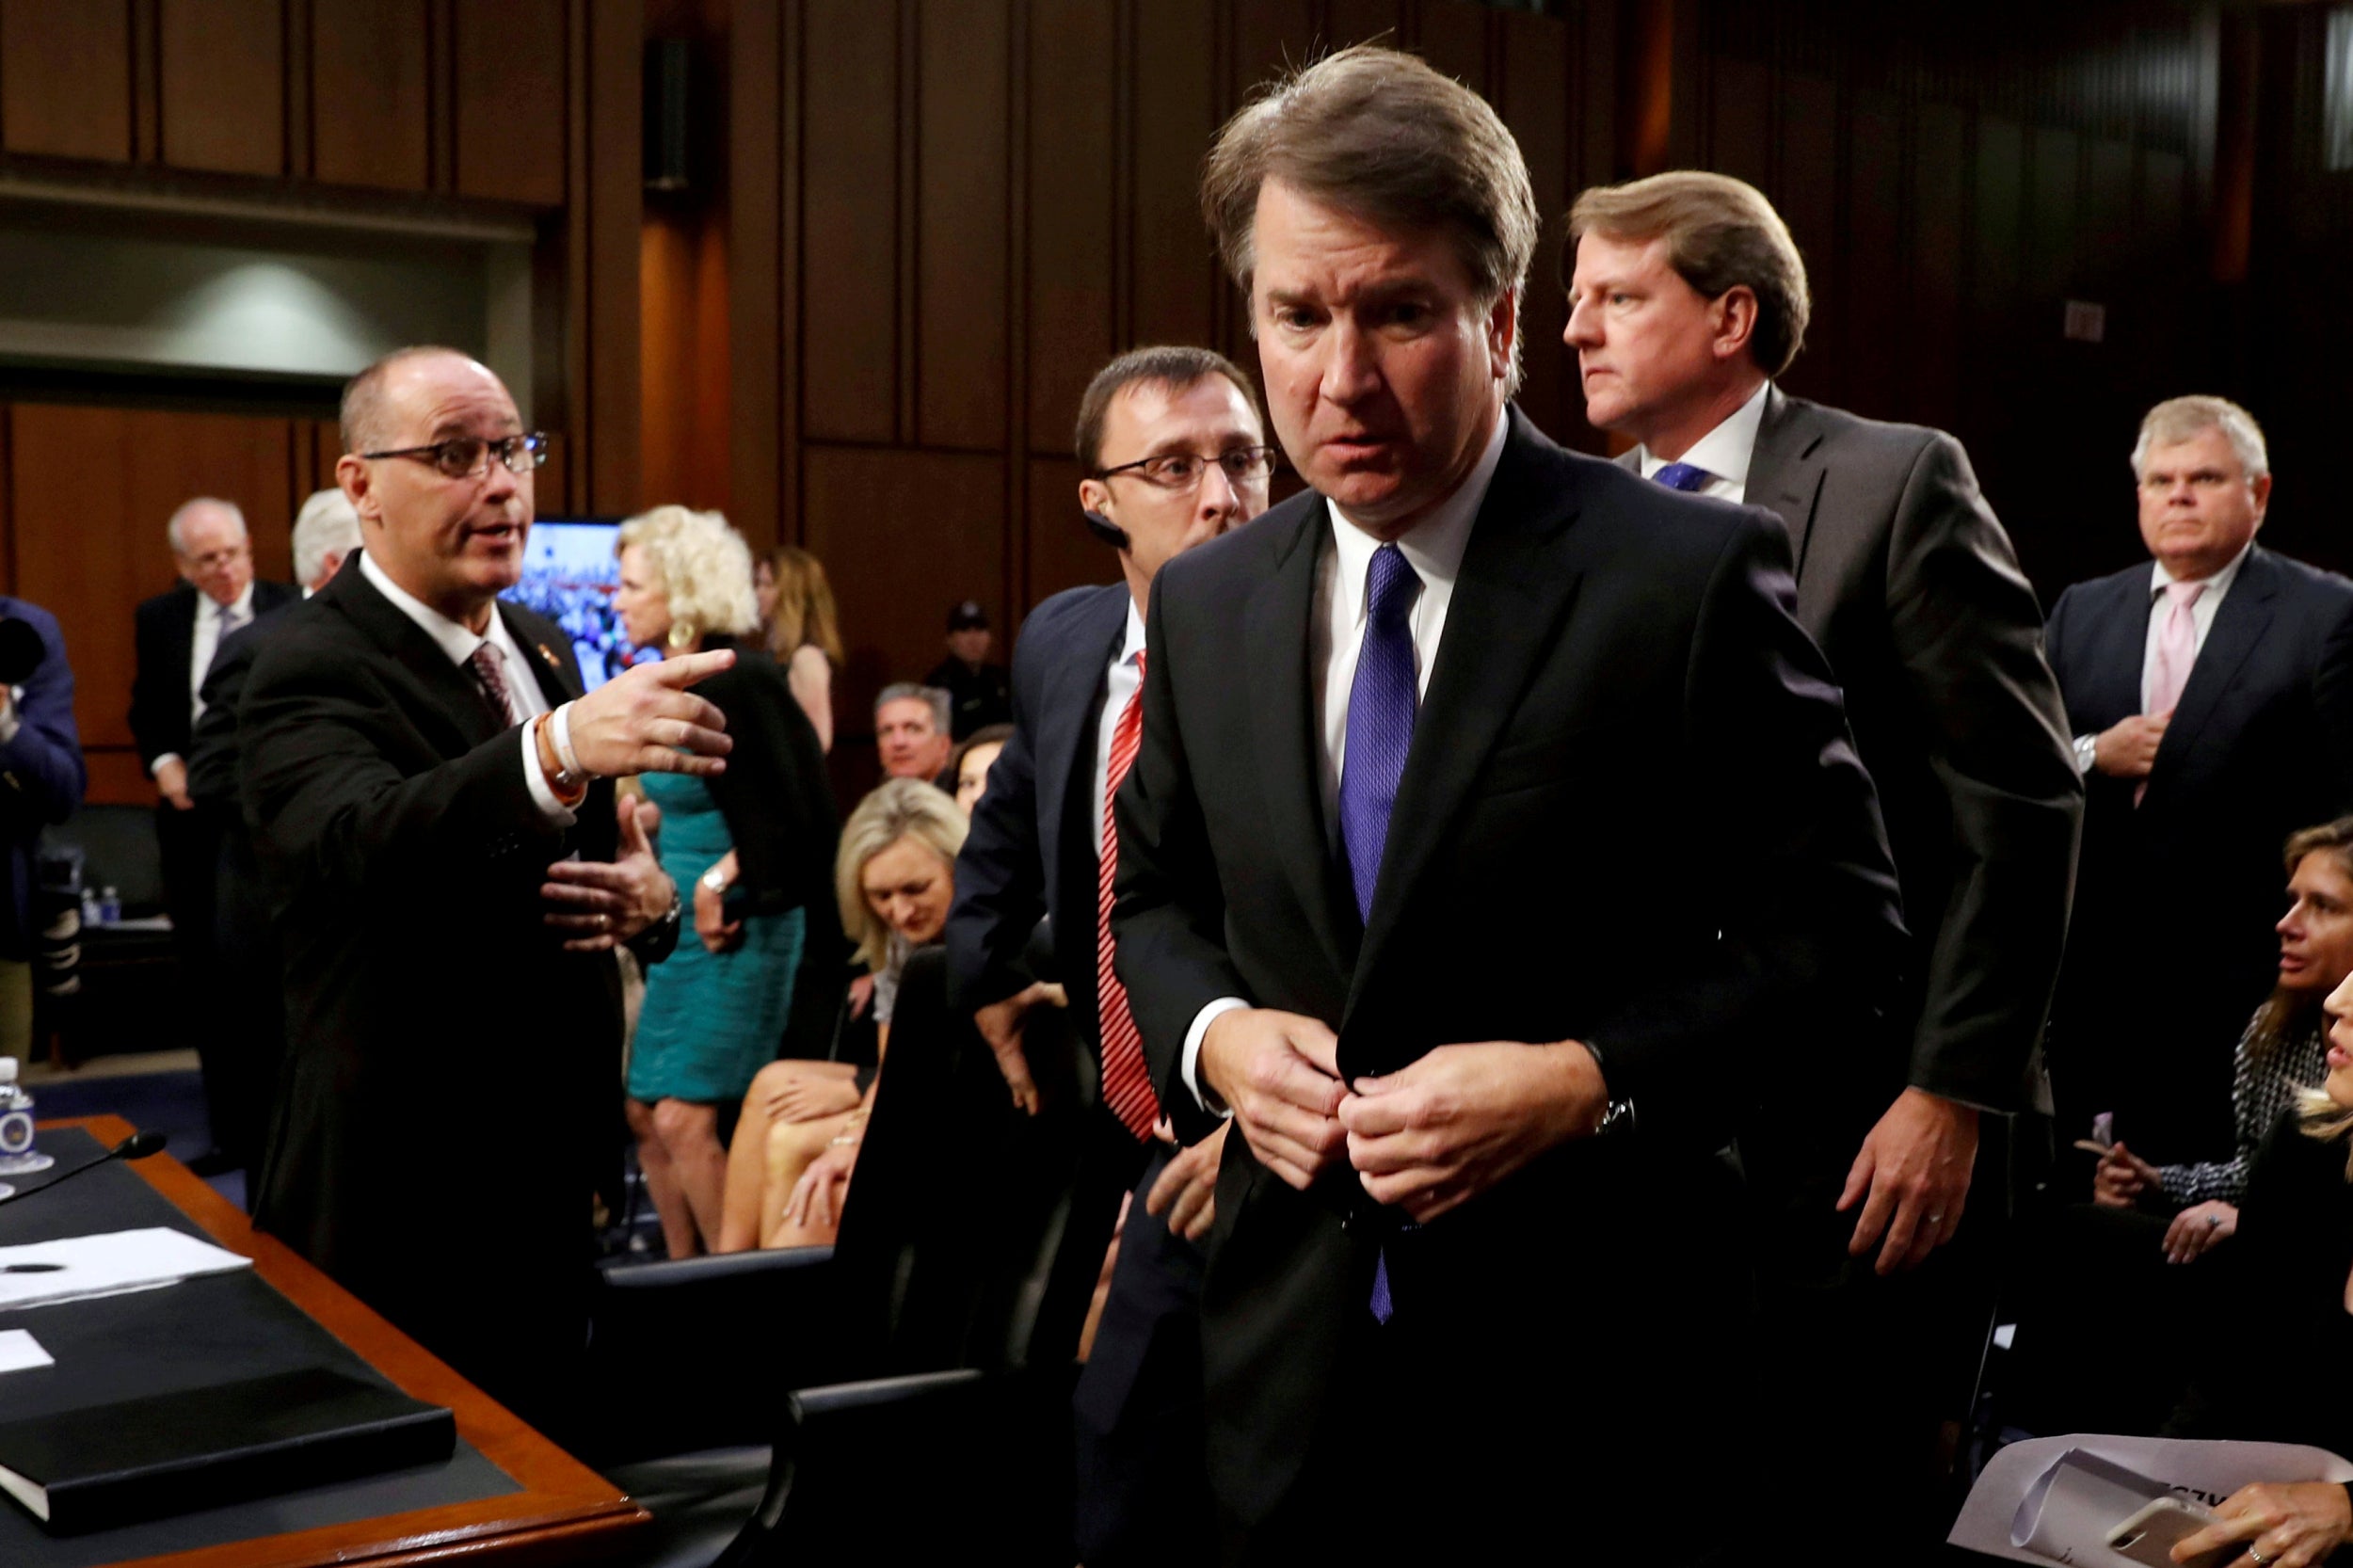 Fresh allegations against Kavanaugh include an alleged incident at a college party